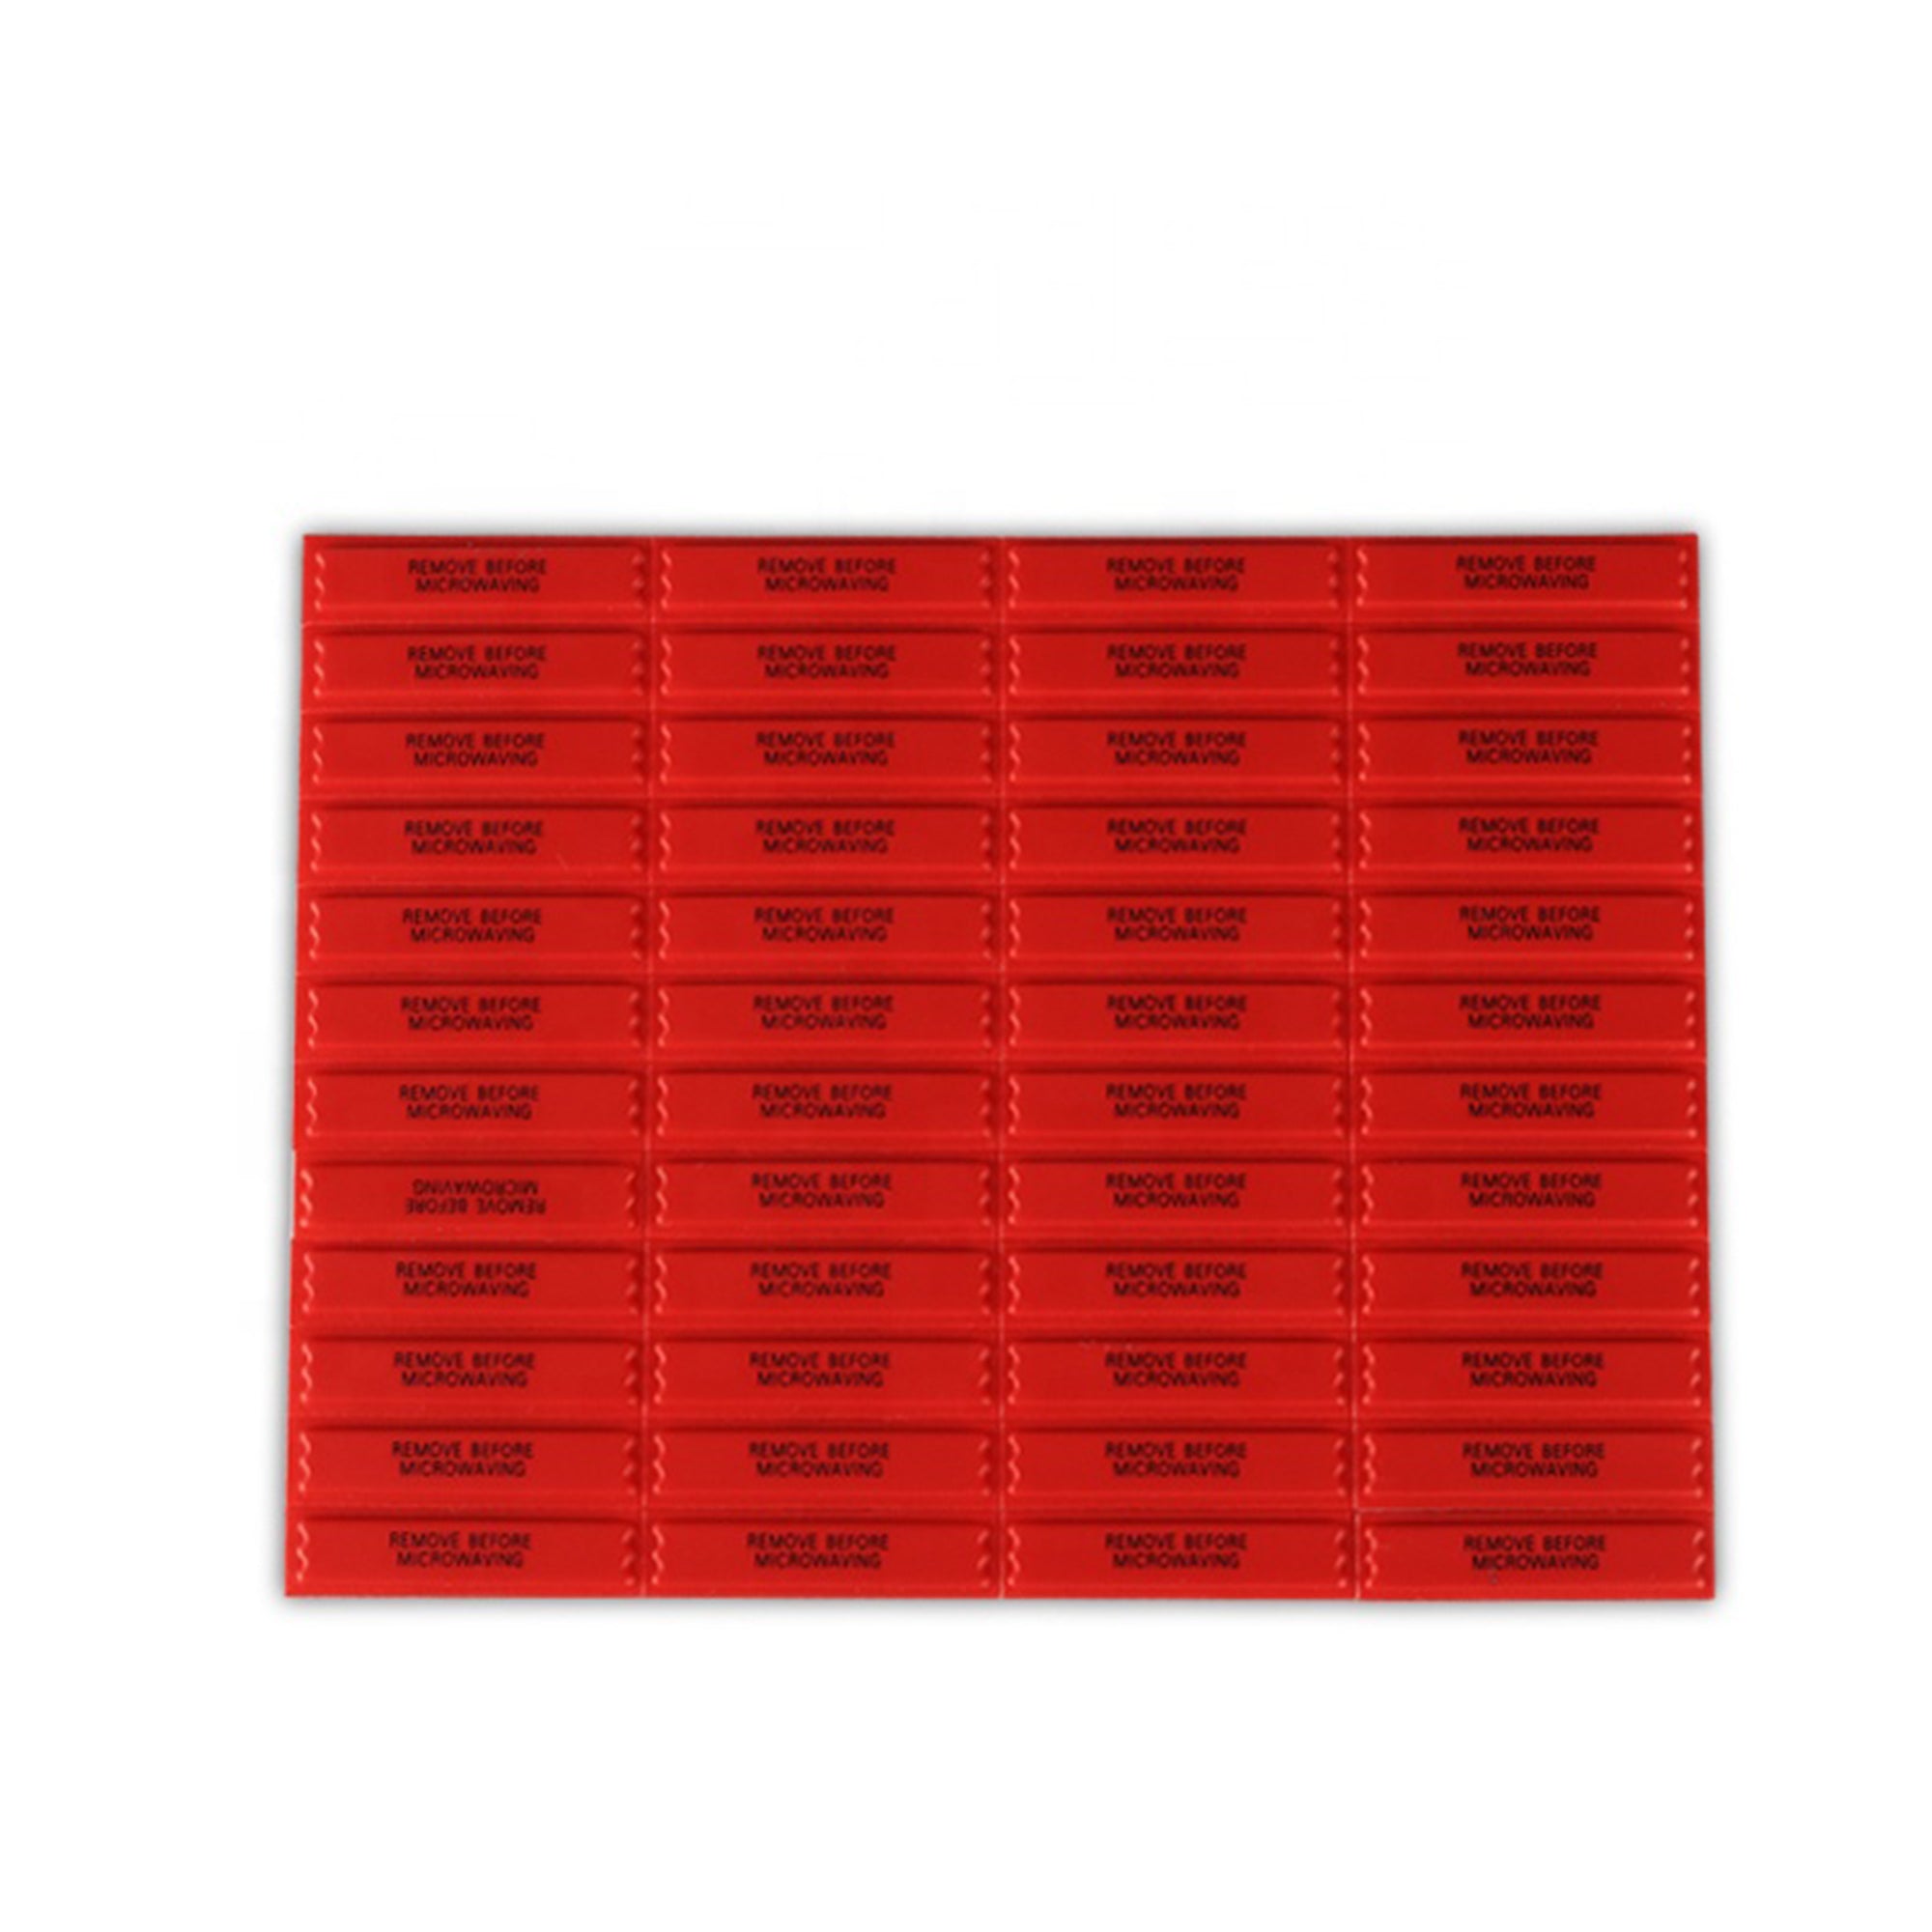 Synmel EAS AM Microwavable Anti-Theft Label for Frozen Food Security (5000 PCS)